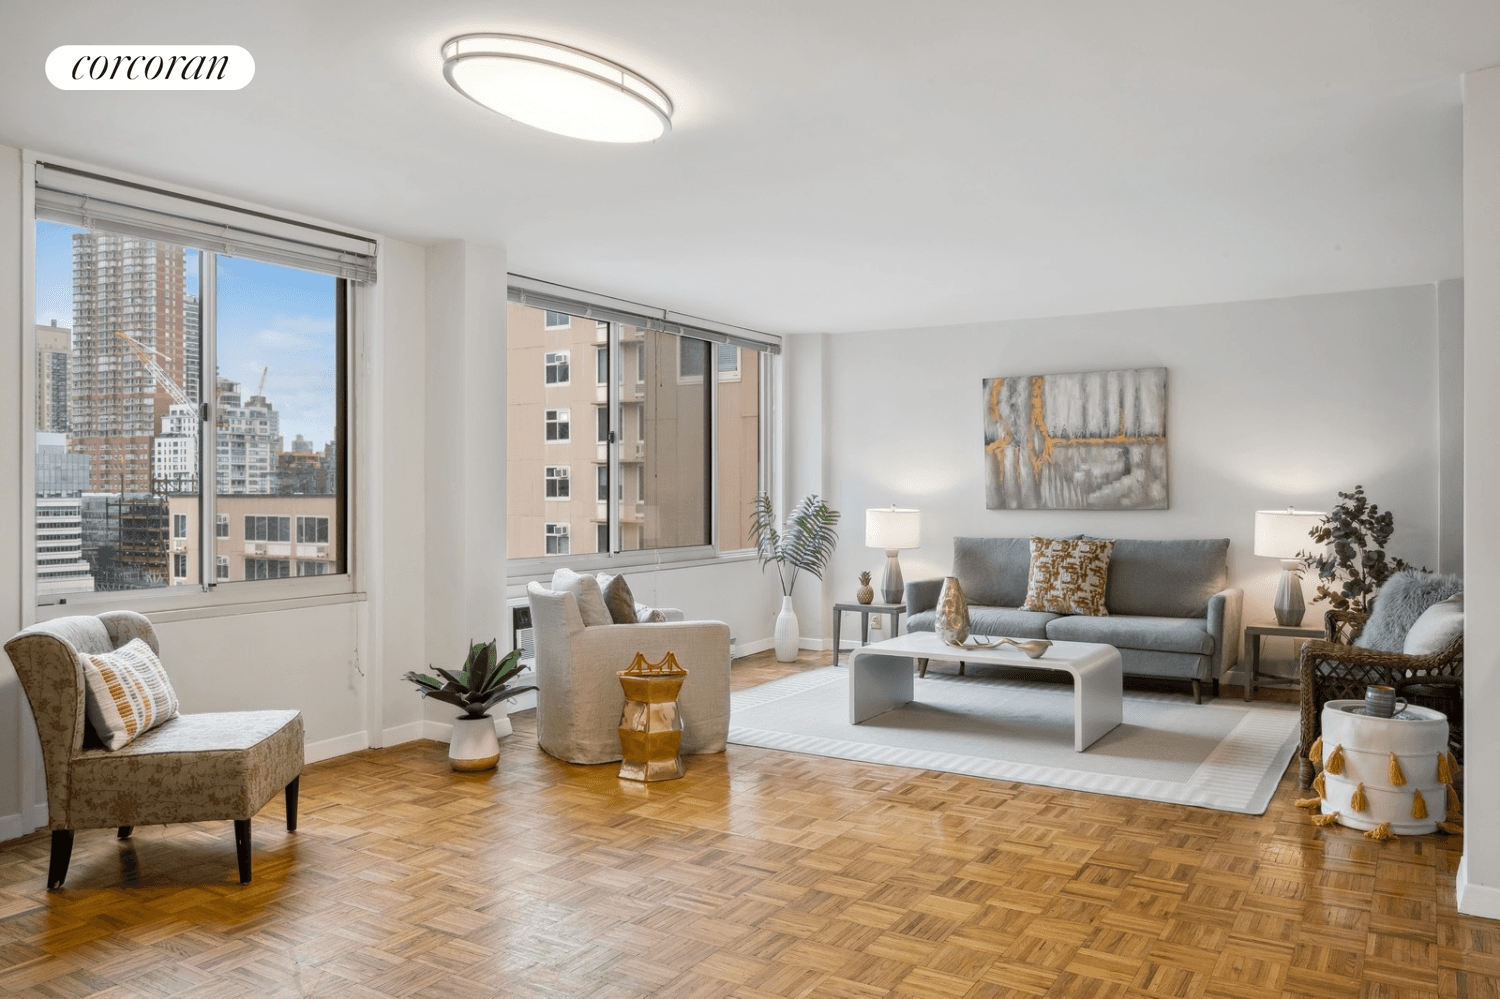 It will be difficult to find a better value in the city than this sun drench suburban style home duplex apartment with spectacular, sweeping views of the Manhattan skyline and ...